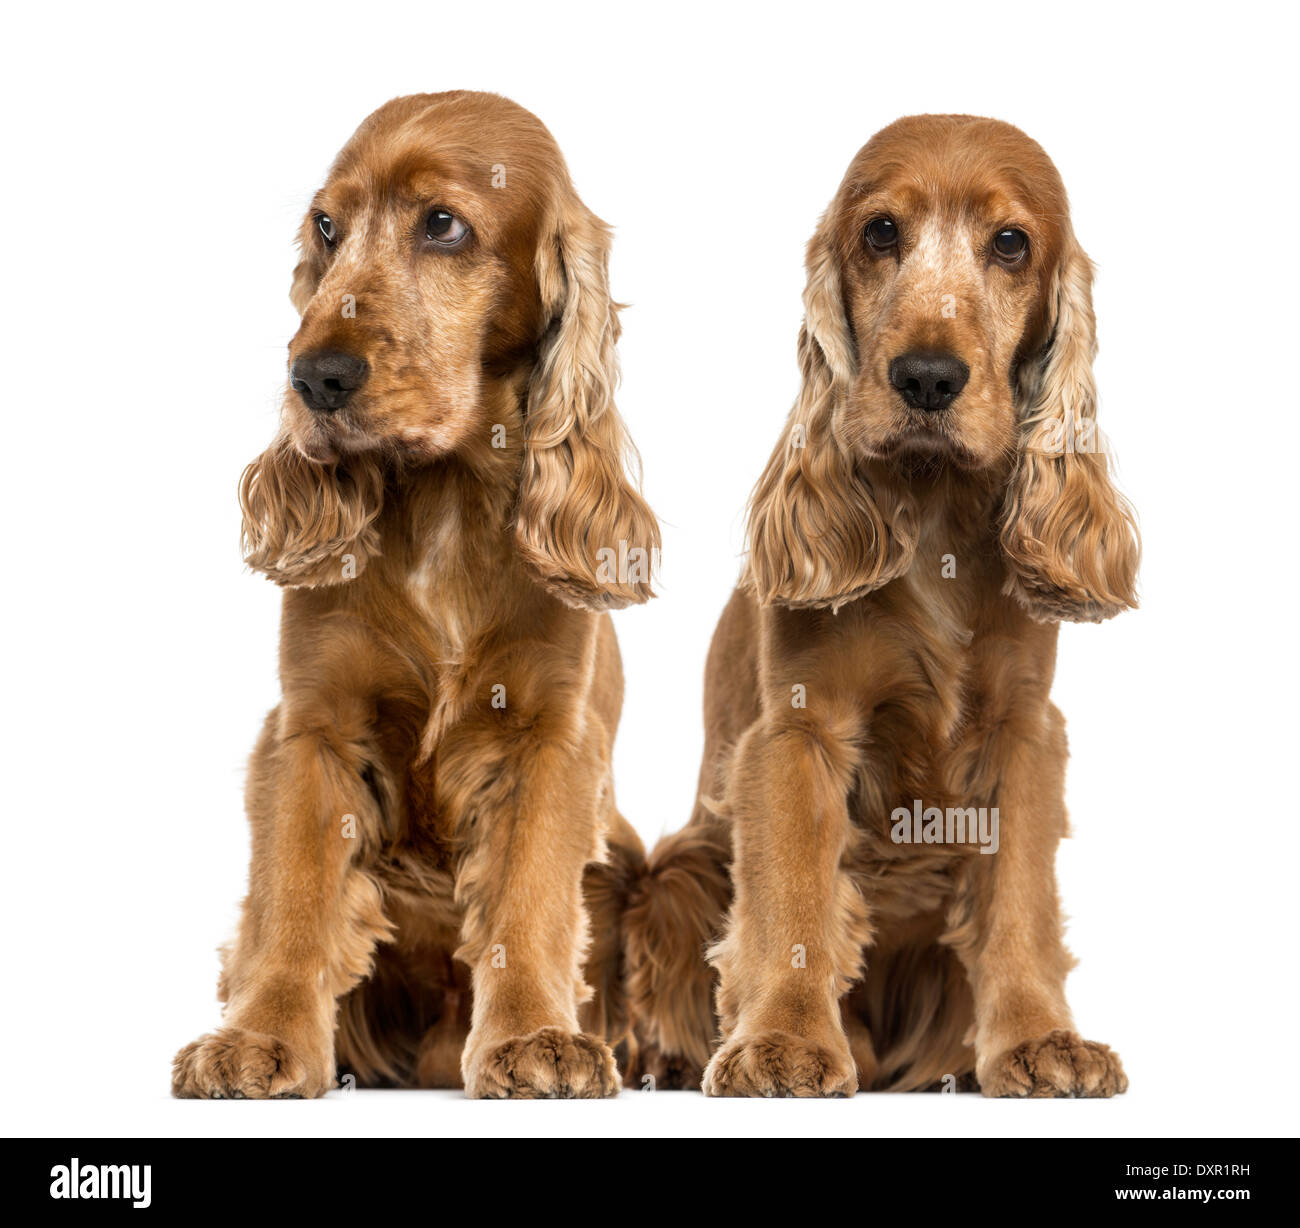 Two English Cocker Spaniels sitting against white background Stock Photo